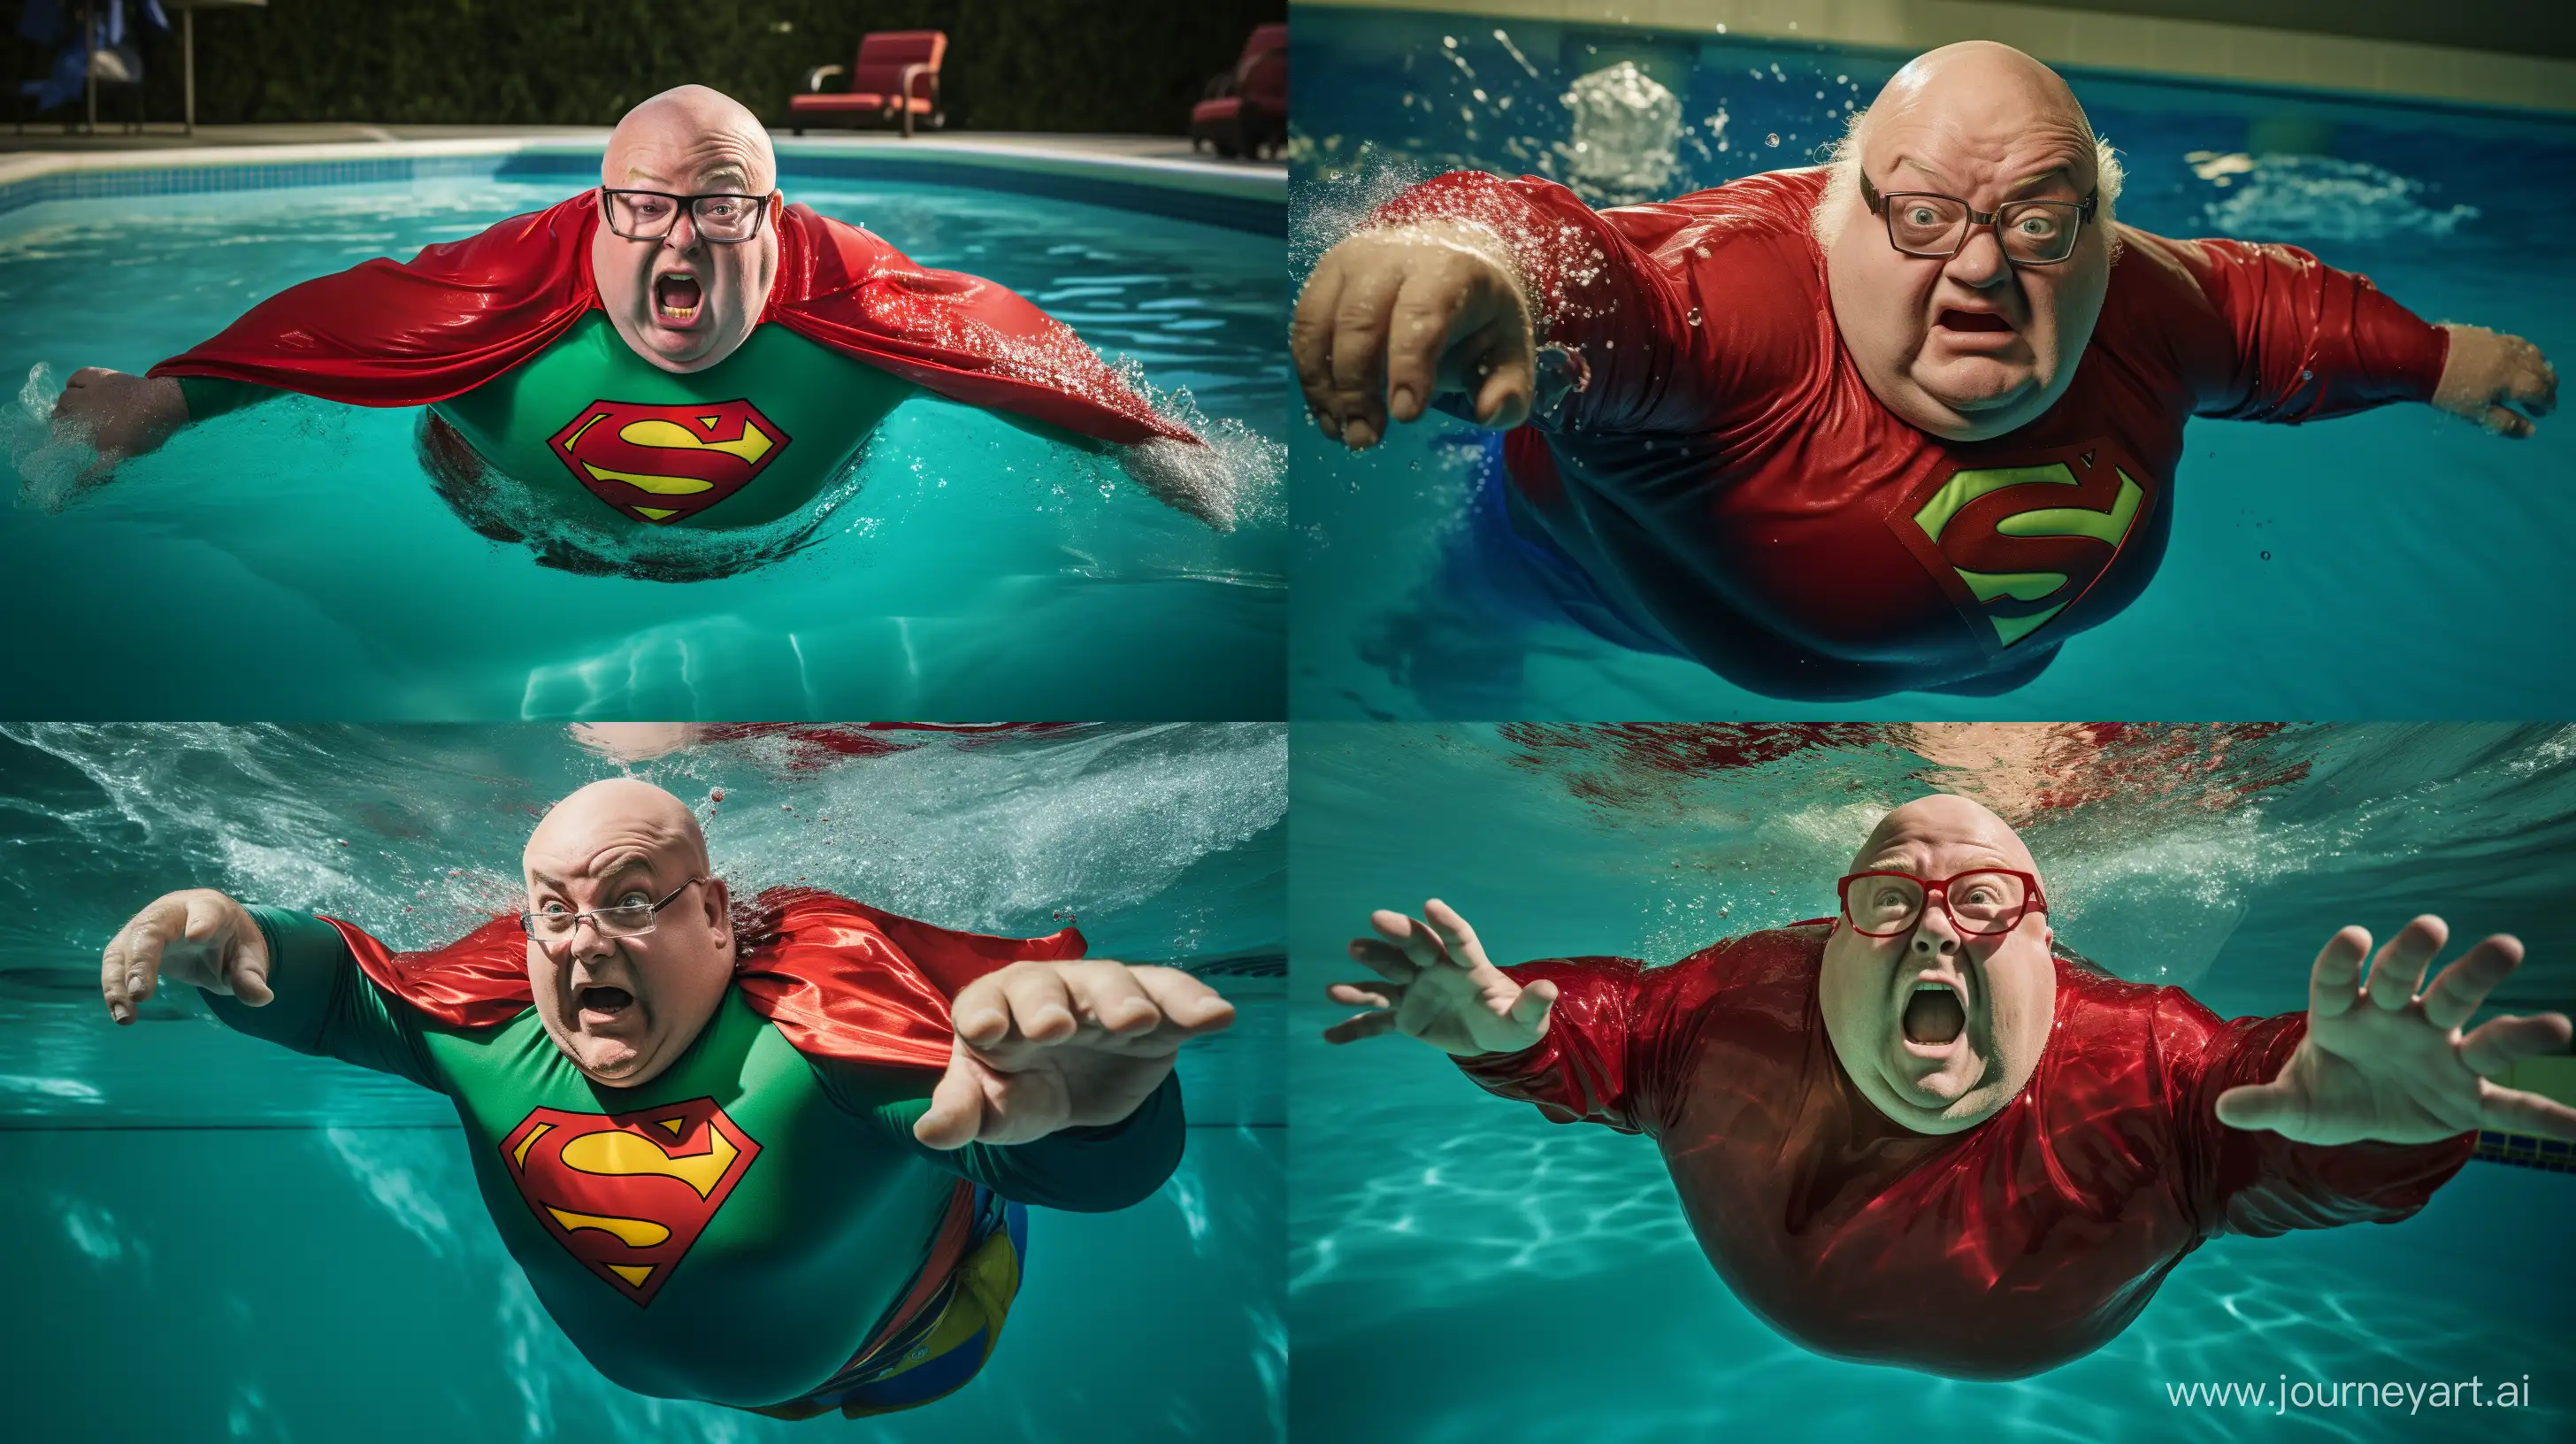 chubby man, fear expression, 70 years old, falling in a pool, small green illuminated ball, wet tight blue spandex superman costume, red cape, clean shaven, bald, sharp-focus, high-quality, award-winning photograph, Canon EOS 5D Mark IV DSLR, professional lighting setup, Adobe Photoshop --ar 16:9